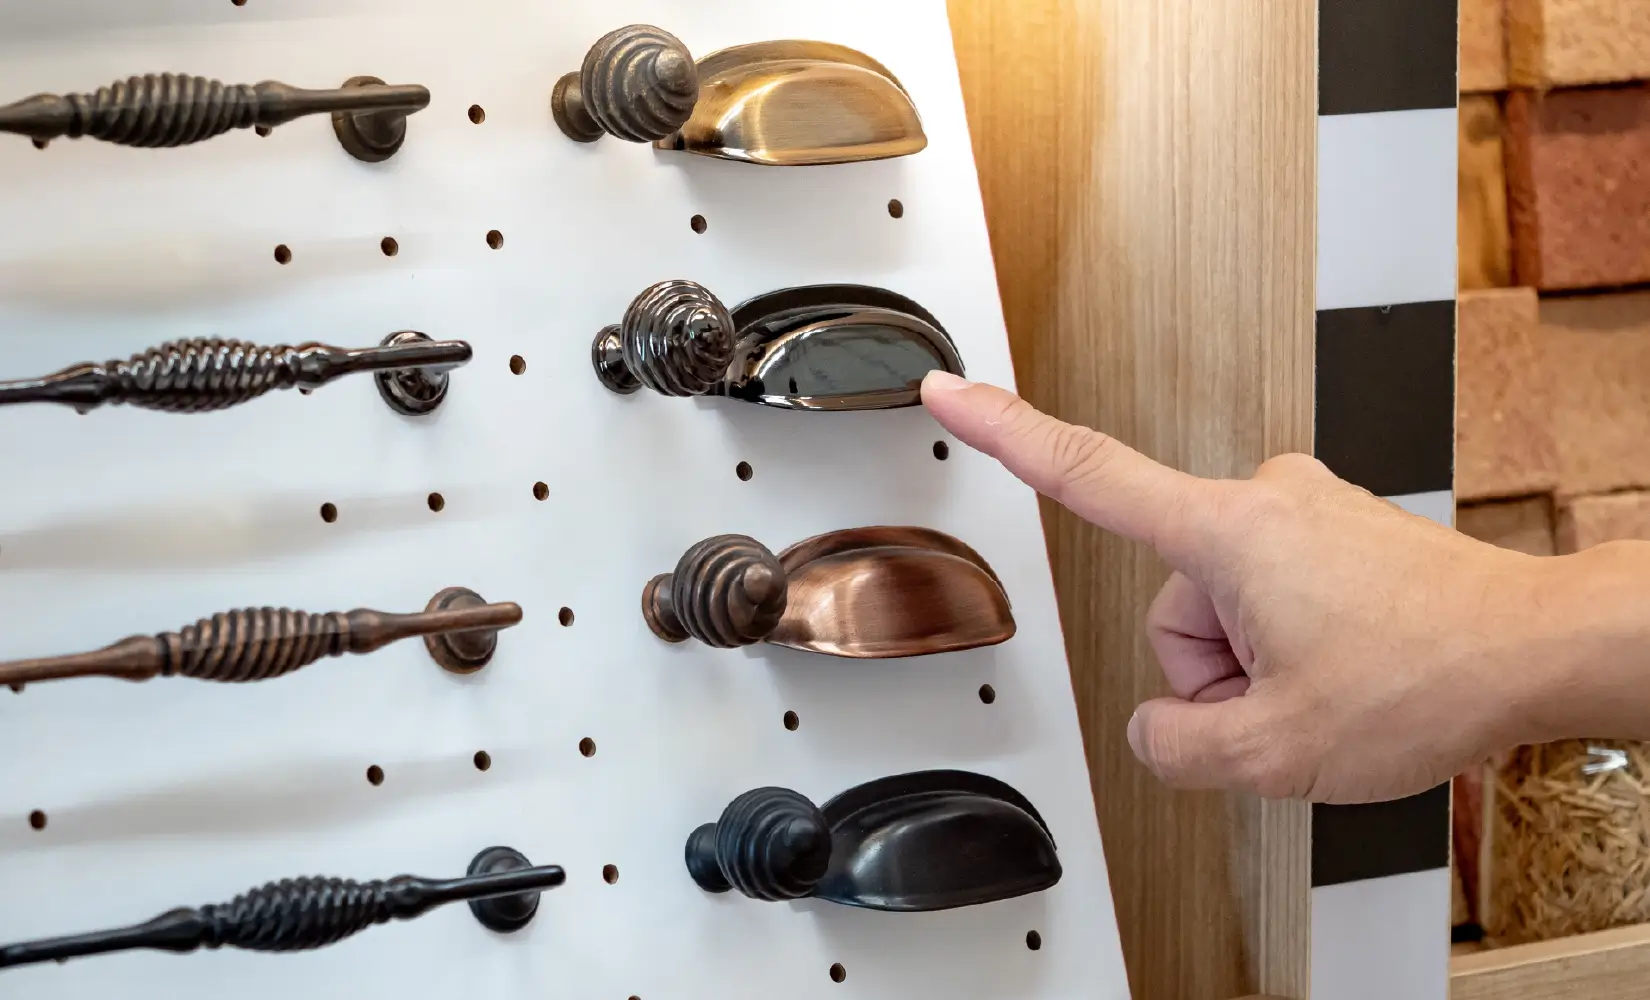 Display of cabinet pulls, knobs, and handles in different finishes.